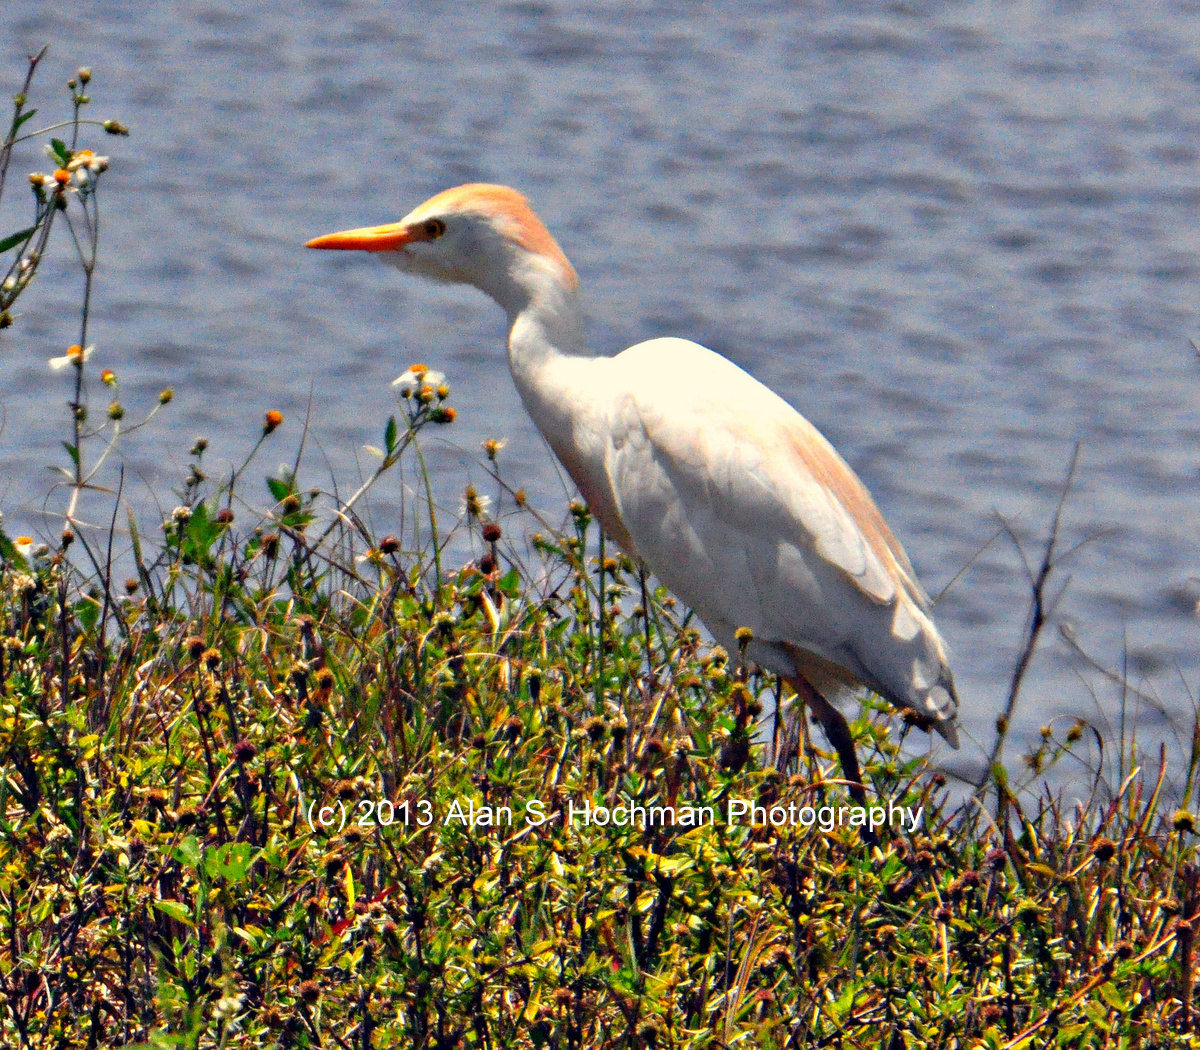 "Cattle Egret at the L-28 Interceptor Levee in Collier County, Florida"